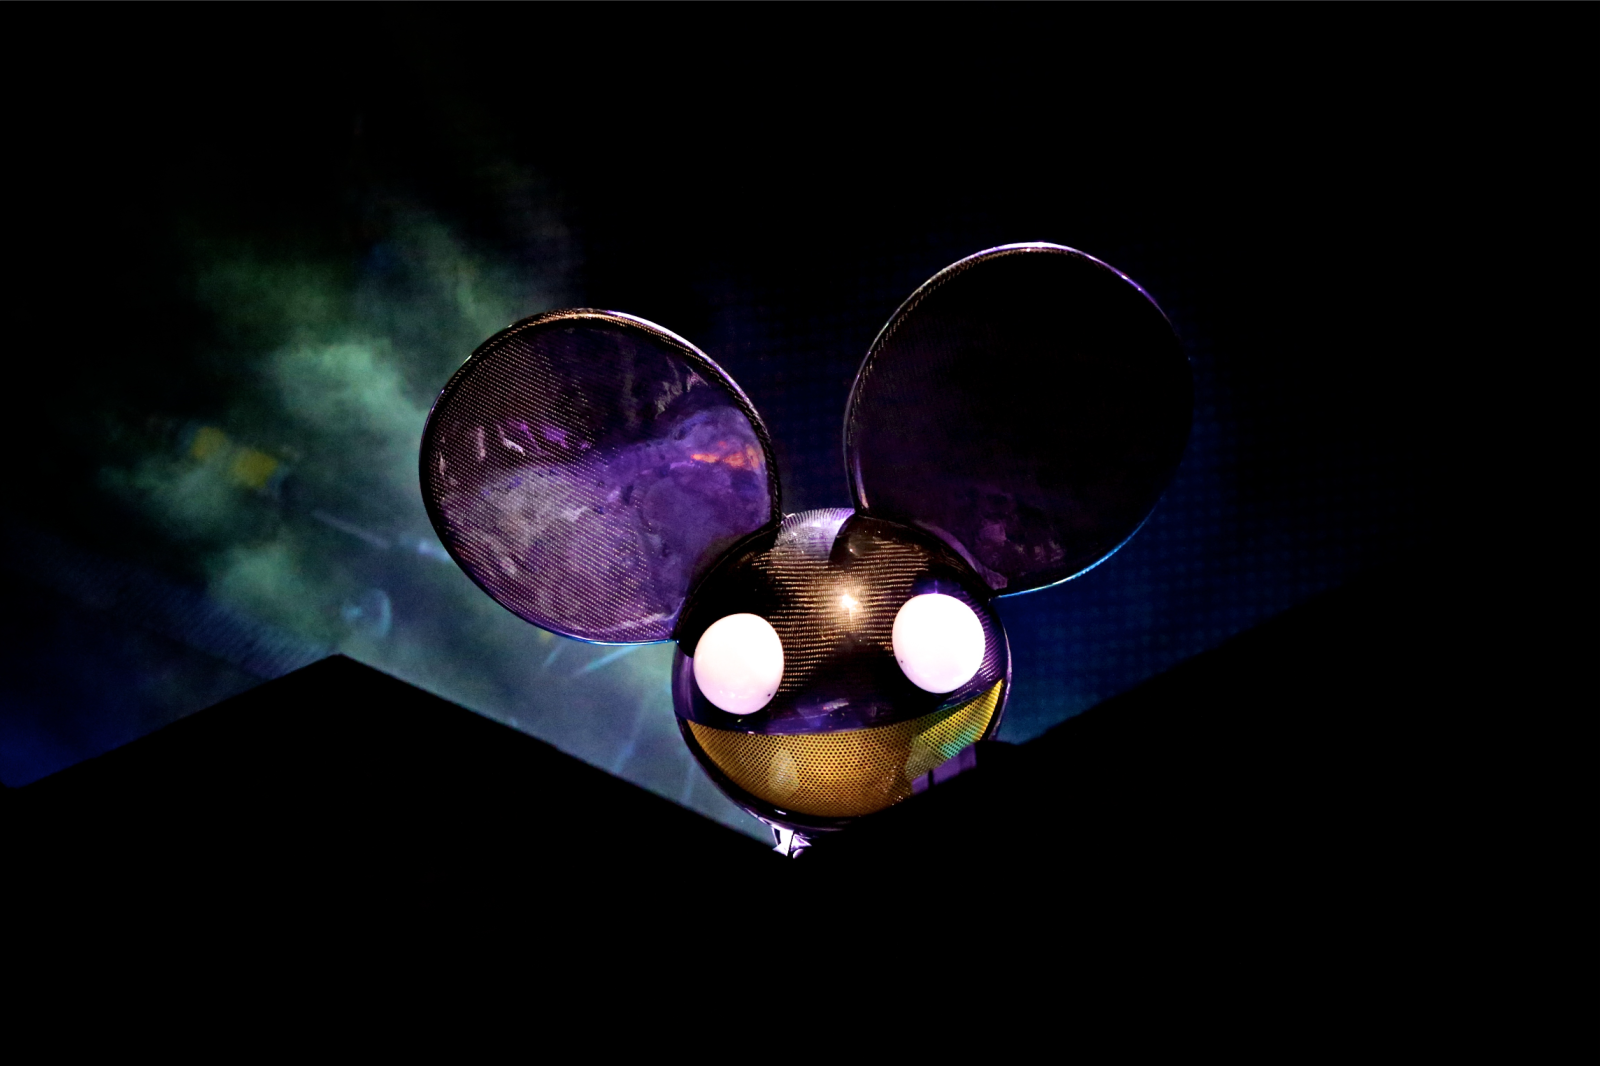 [ALBUM REVIEW] deadmau5 – W:/2016ALBUM/ Playing New, Visiting Old